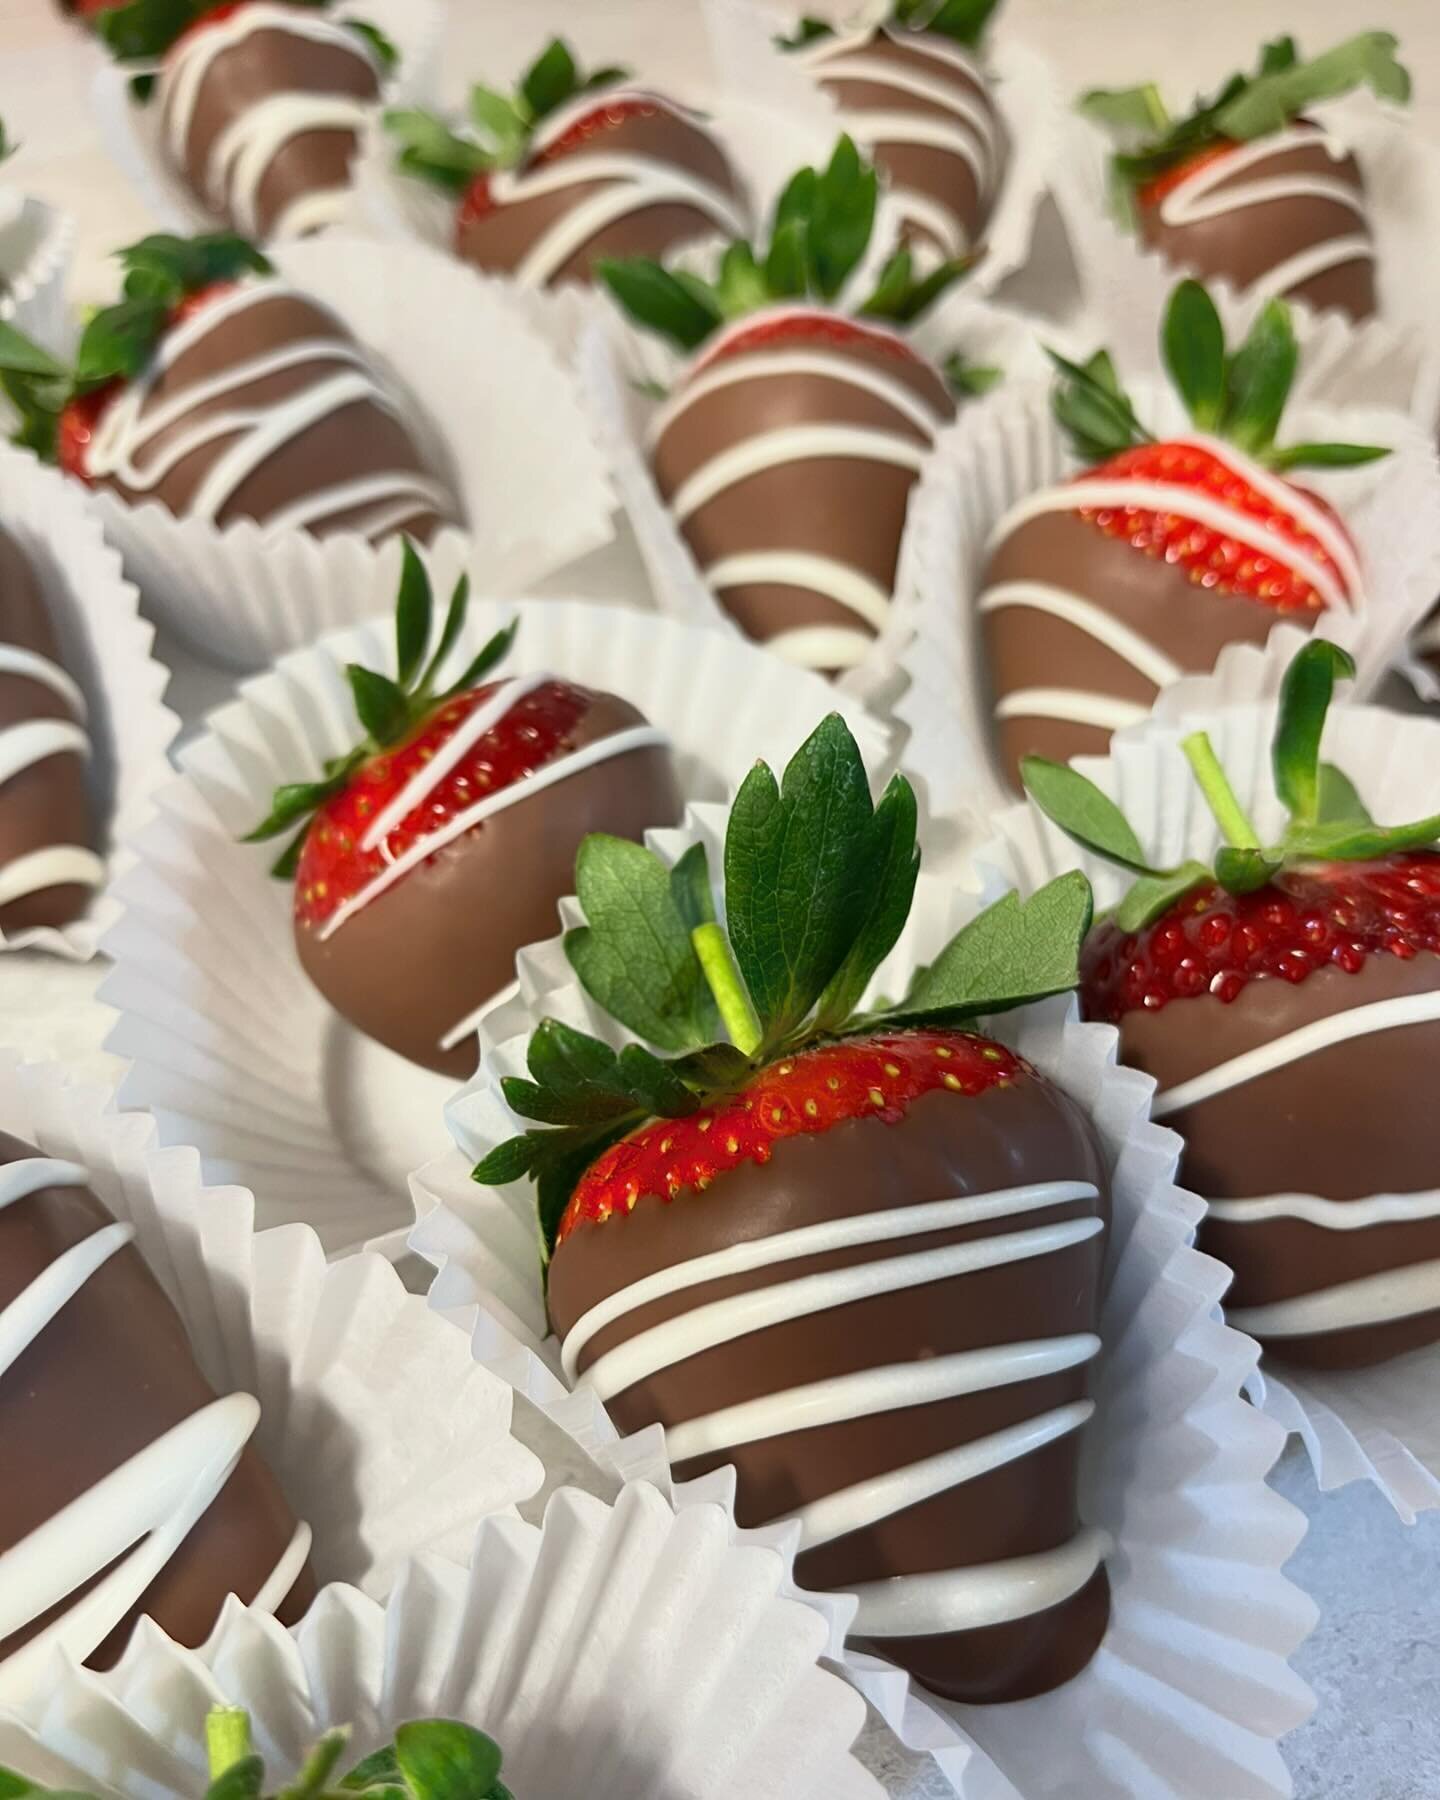 Our own chocolate covered strawberries, hand dipped for you this morning!

Available TODAY ONLY. 

Get them while supplies last.

We&rsquo;re open 8-5 today. 

#theproduceplaceksq #handdippedstrawberries #shoplocal